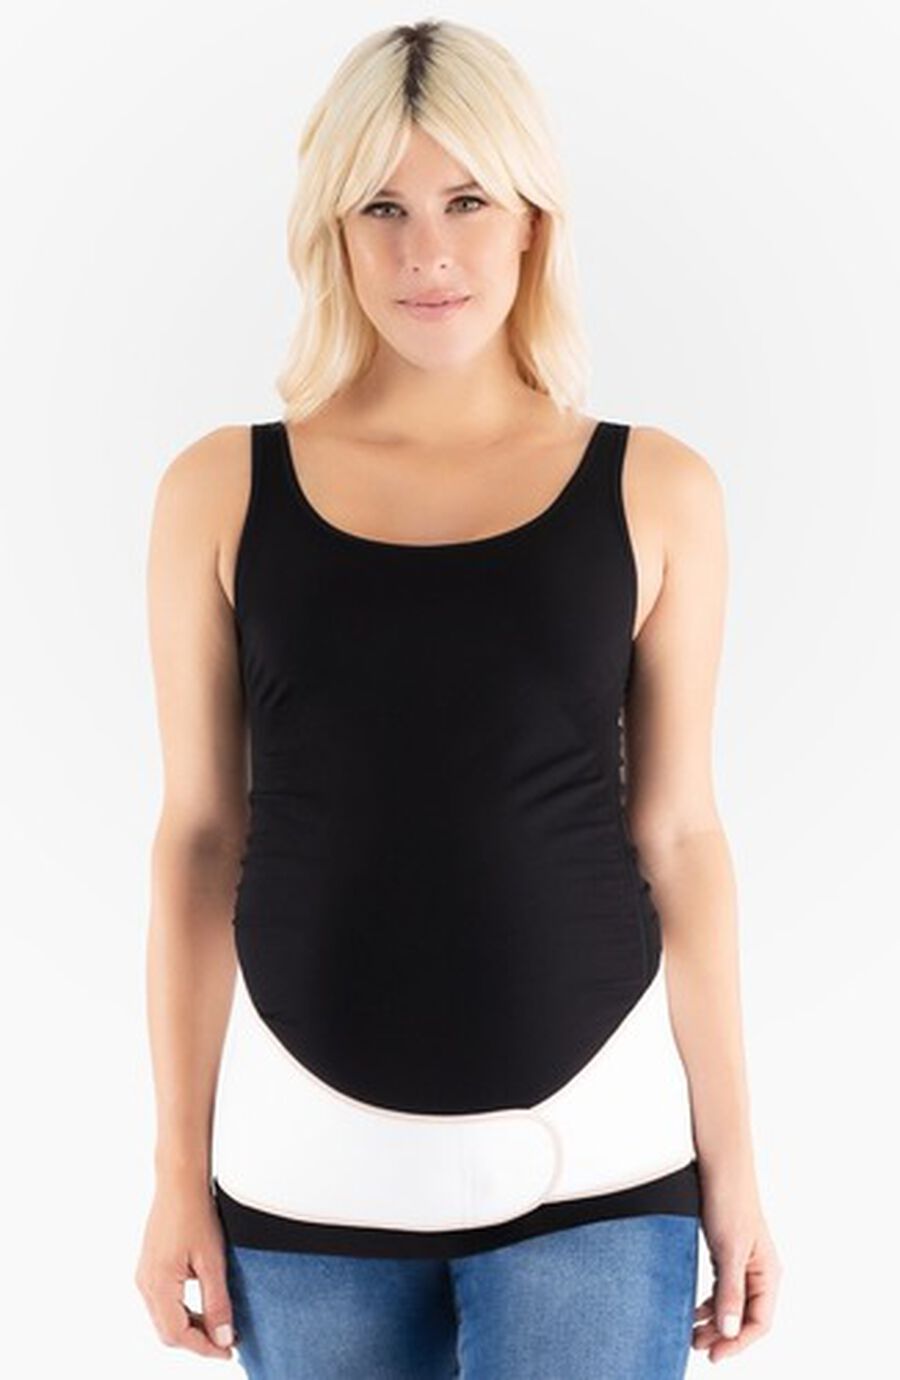 Belly Bandit Maternity Pelvic Support, Size 2, L-2XL, , large image number 5